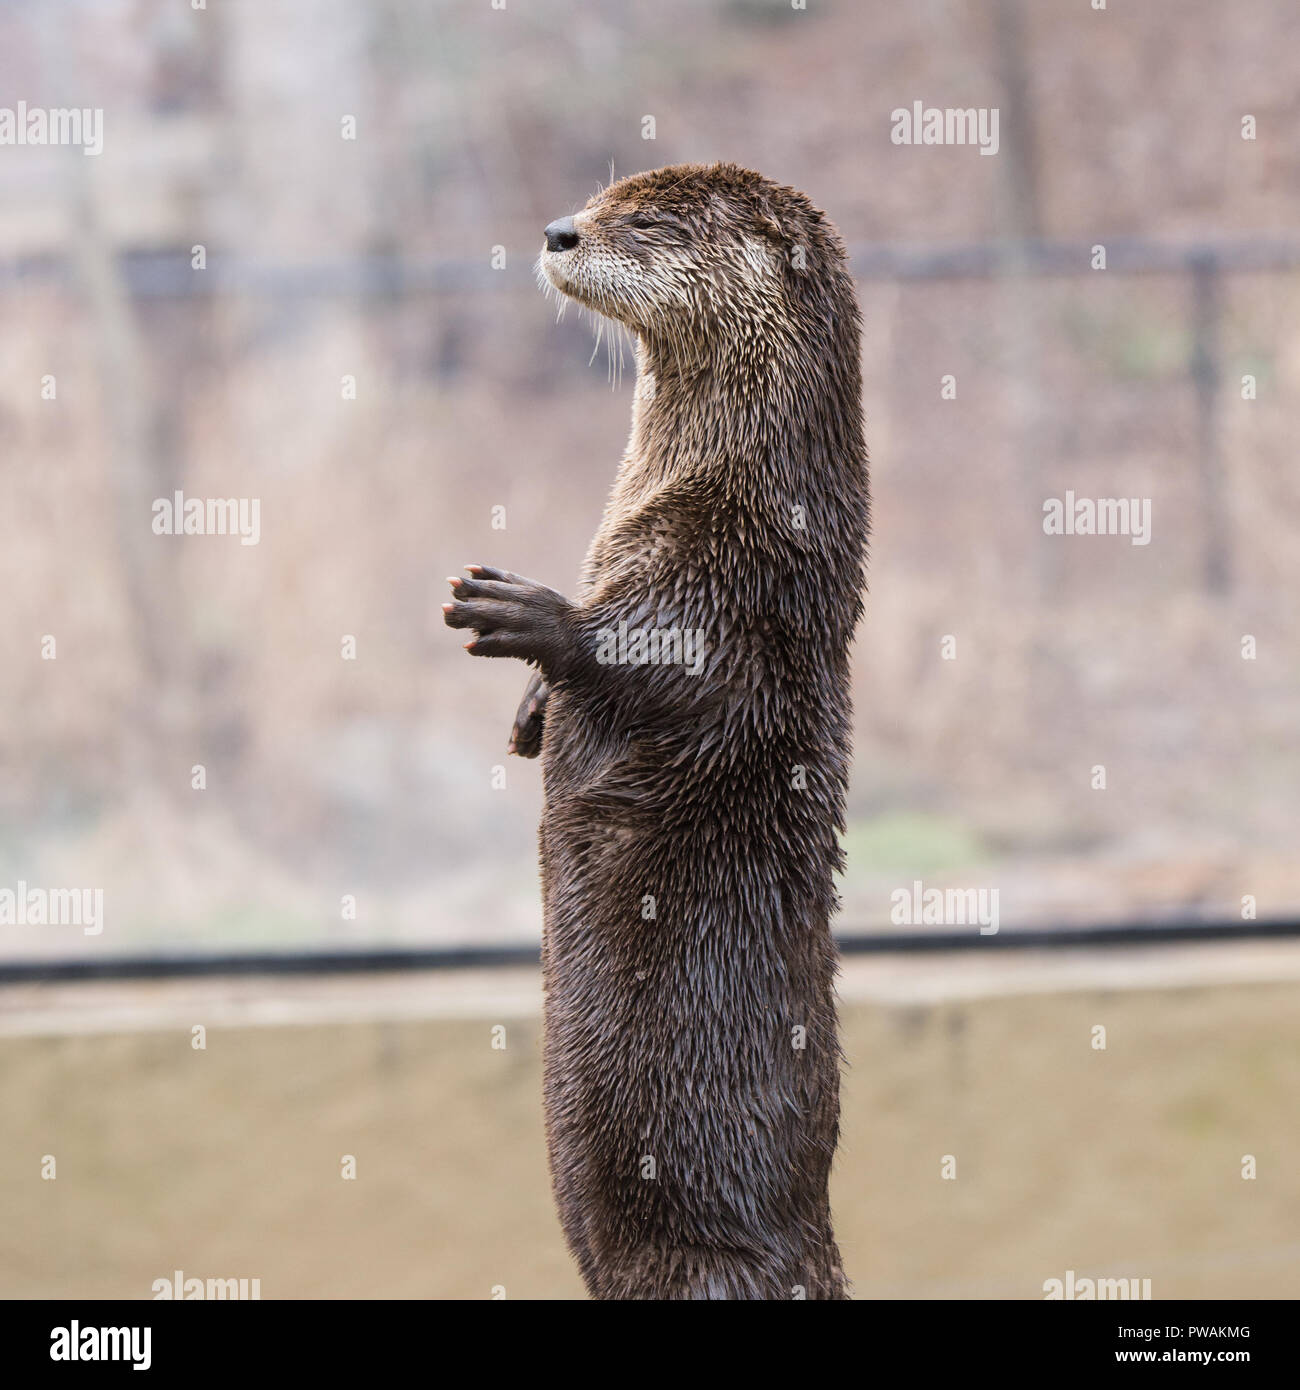 North American river otter (Lontra canadensis) portrait standing side view Stock Photo